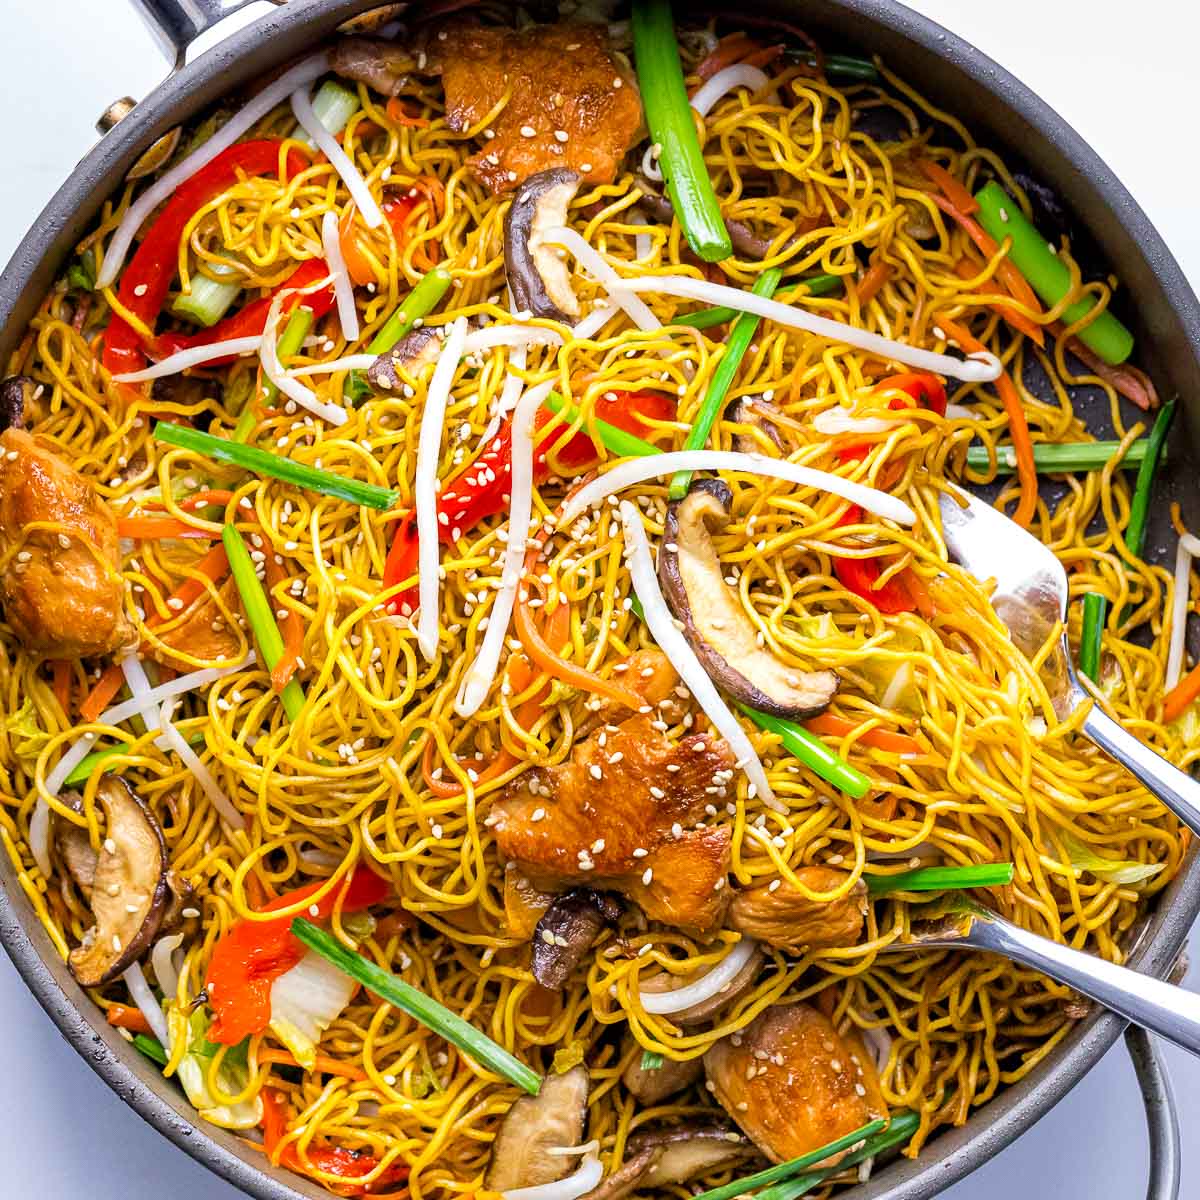 chicken chow mein noodles with vegetables, bean sprouts, peppers in a pan